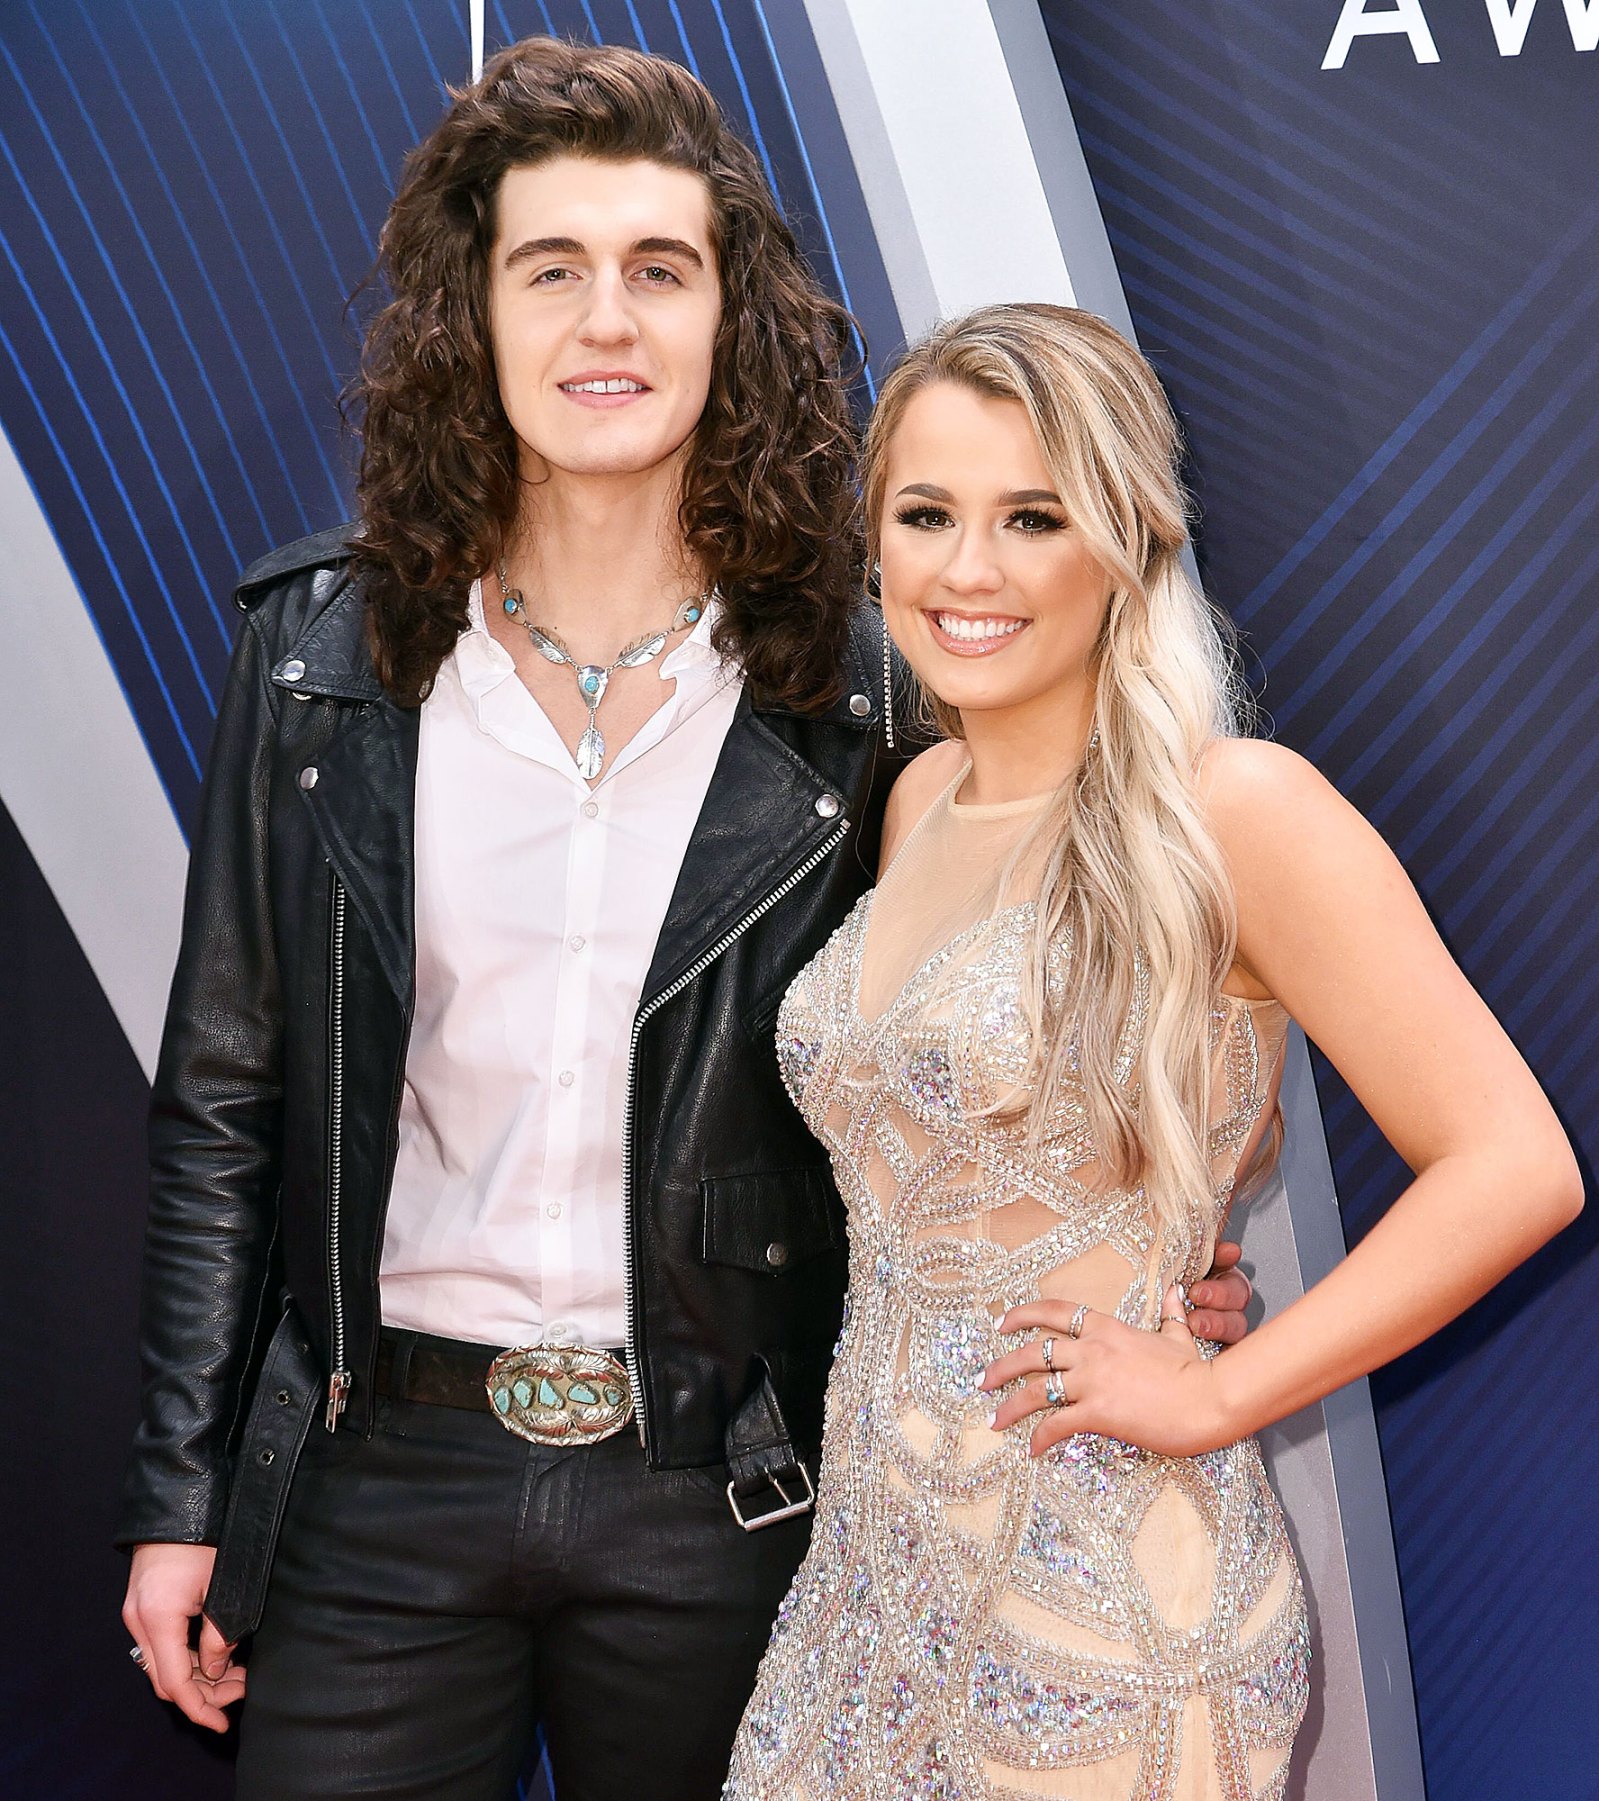 Cade Foehner and Gabby Barrett attend the 52nd Annual CMA Awards American Idol Gabby Barrett and Cade Foehner Welcome Their First Child